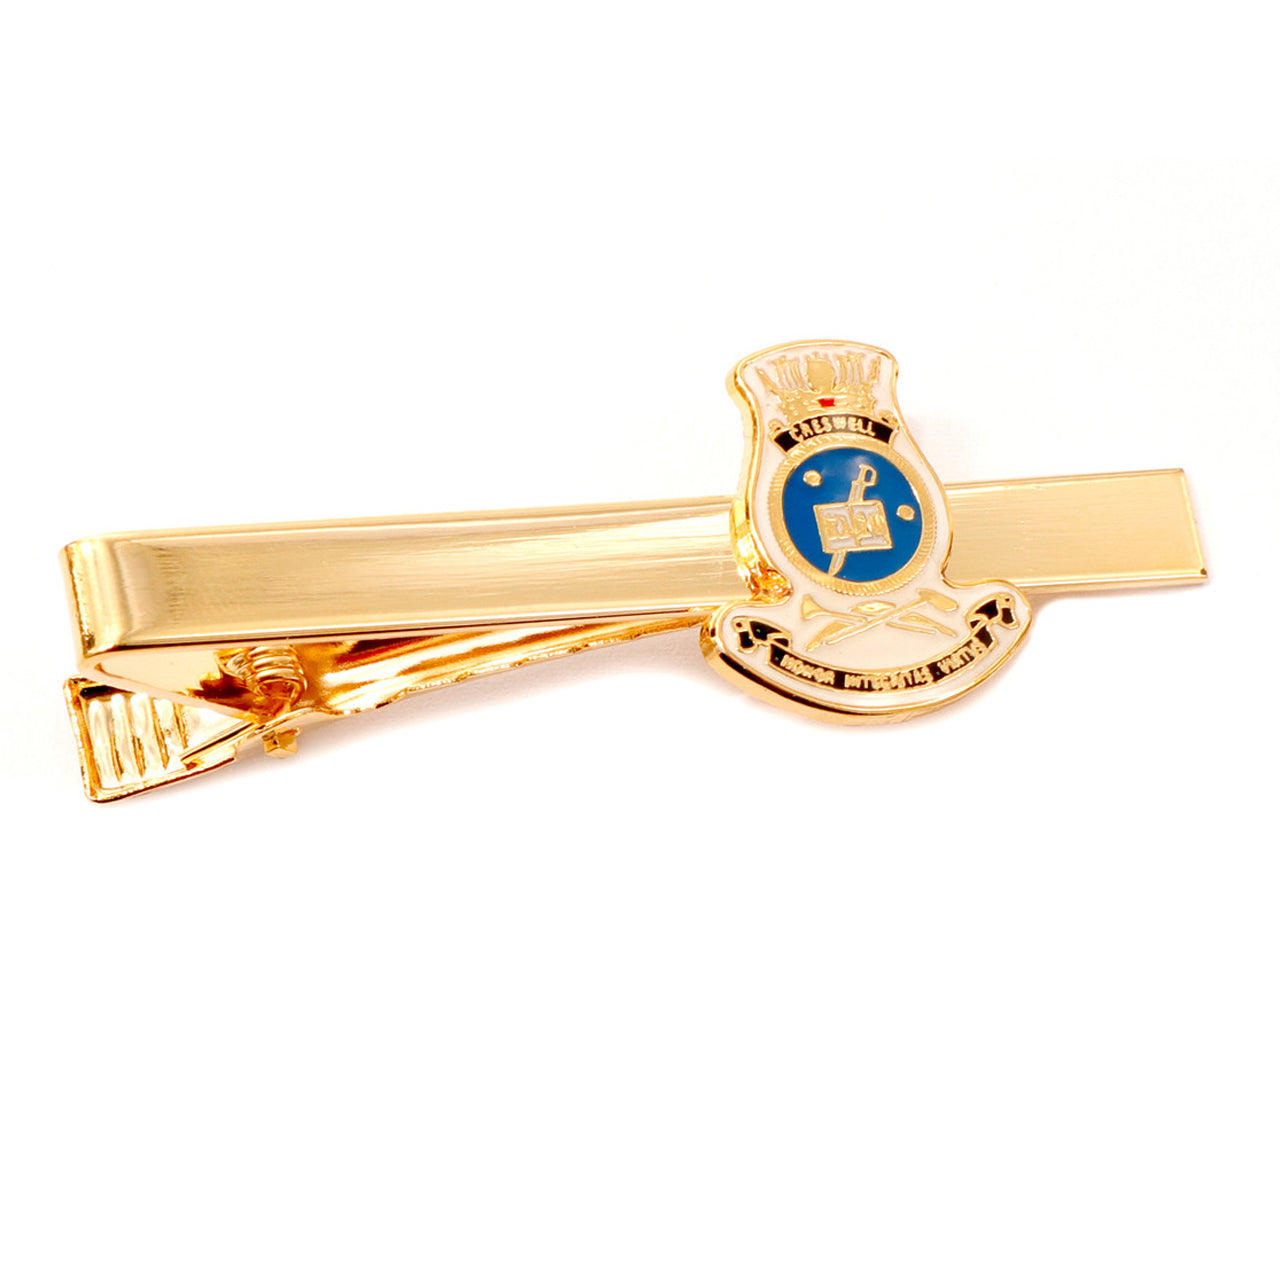 Add a touch of elegance to your look with the HMAS Creswell 20mm enamel tie bar! Crafted with gold-plated material, this gorgeous tie bar is perfect for any work or formal occasion. www.defenceqstore.com.au